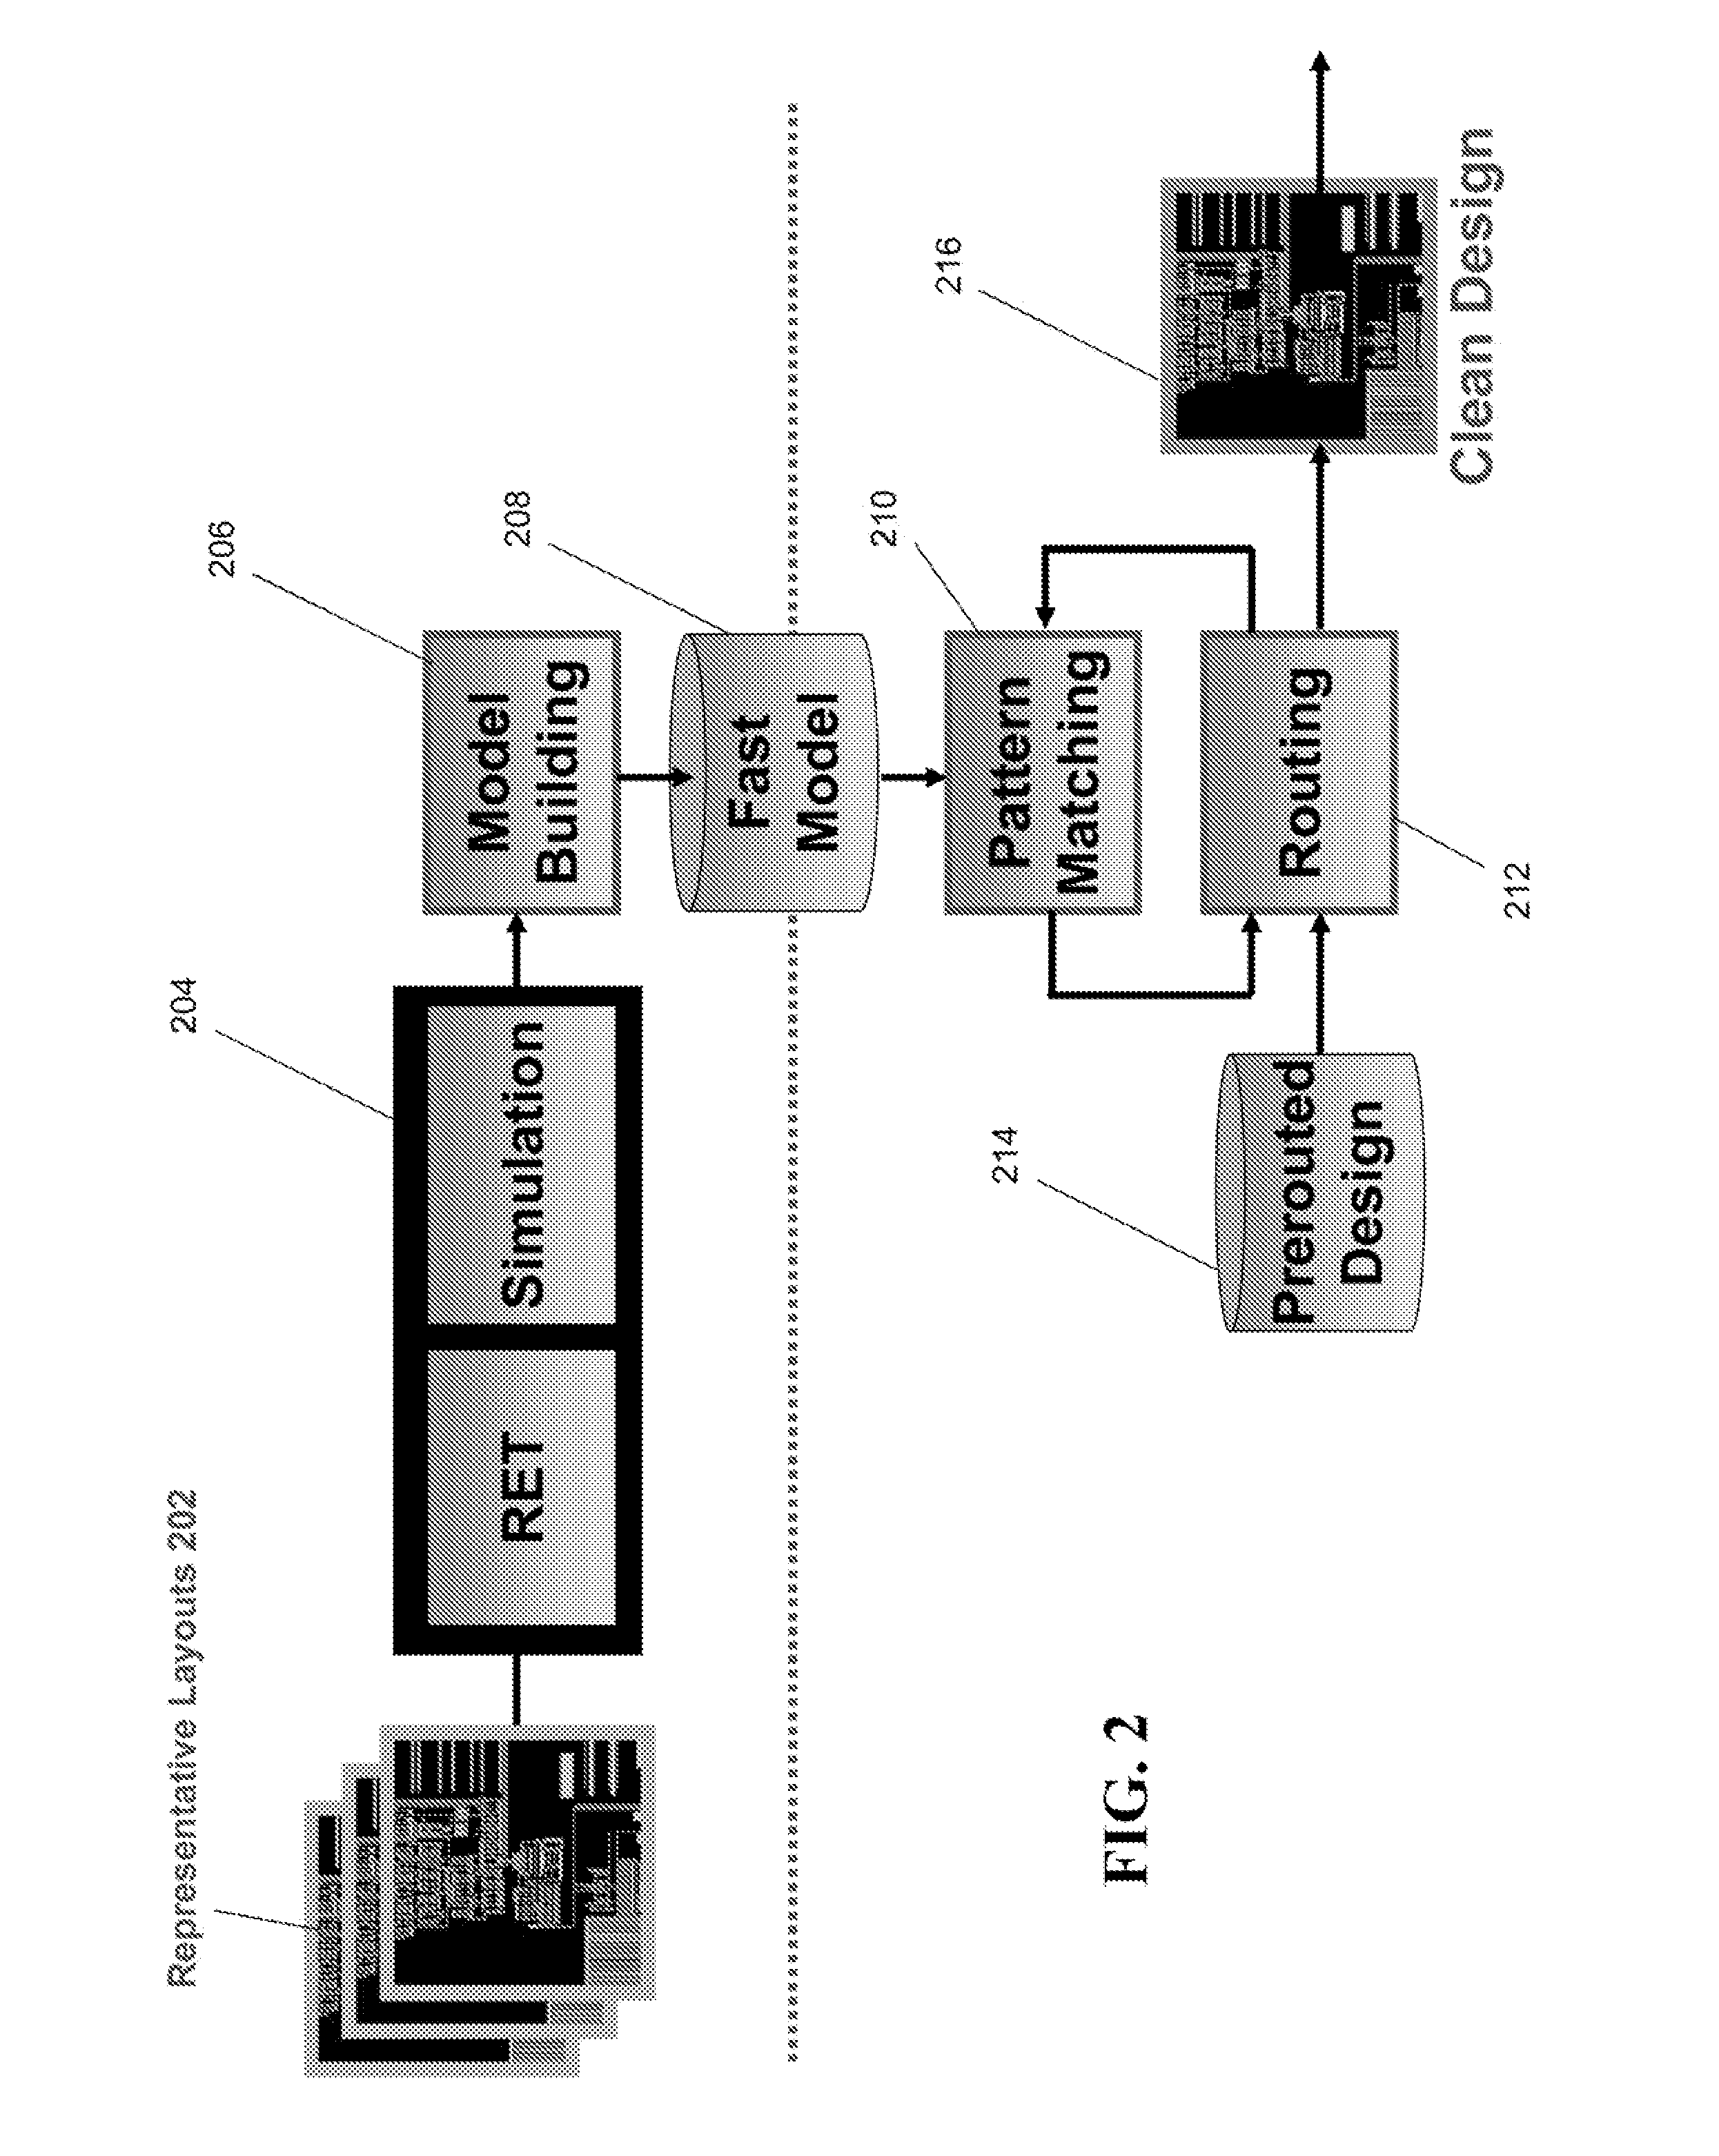 Method and system for model-based design and layout of an integrated circuit